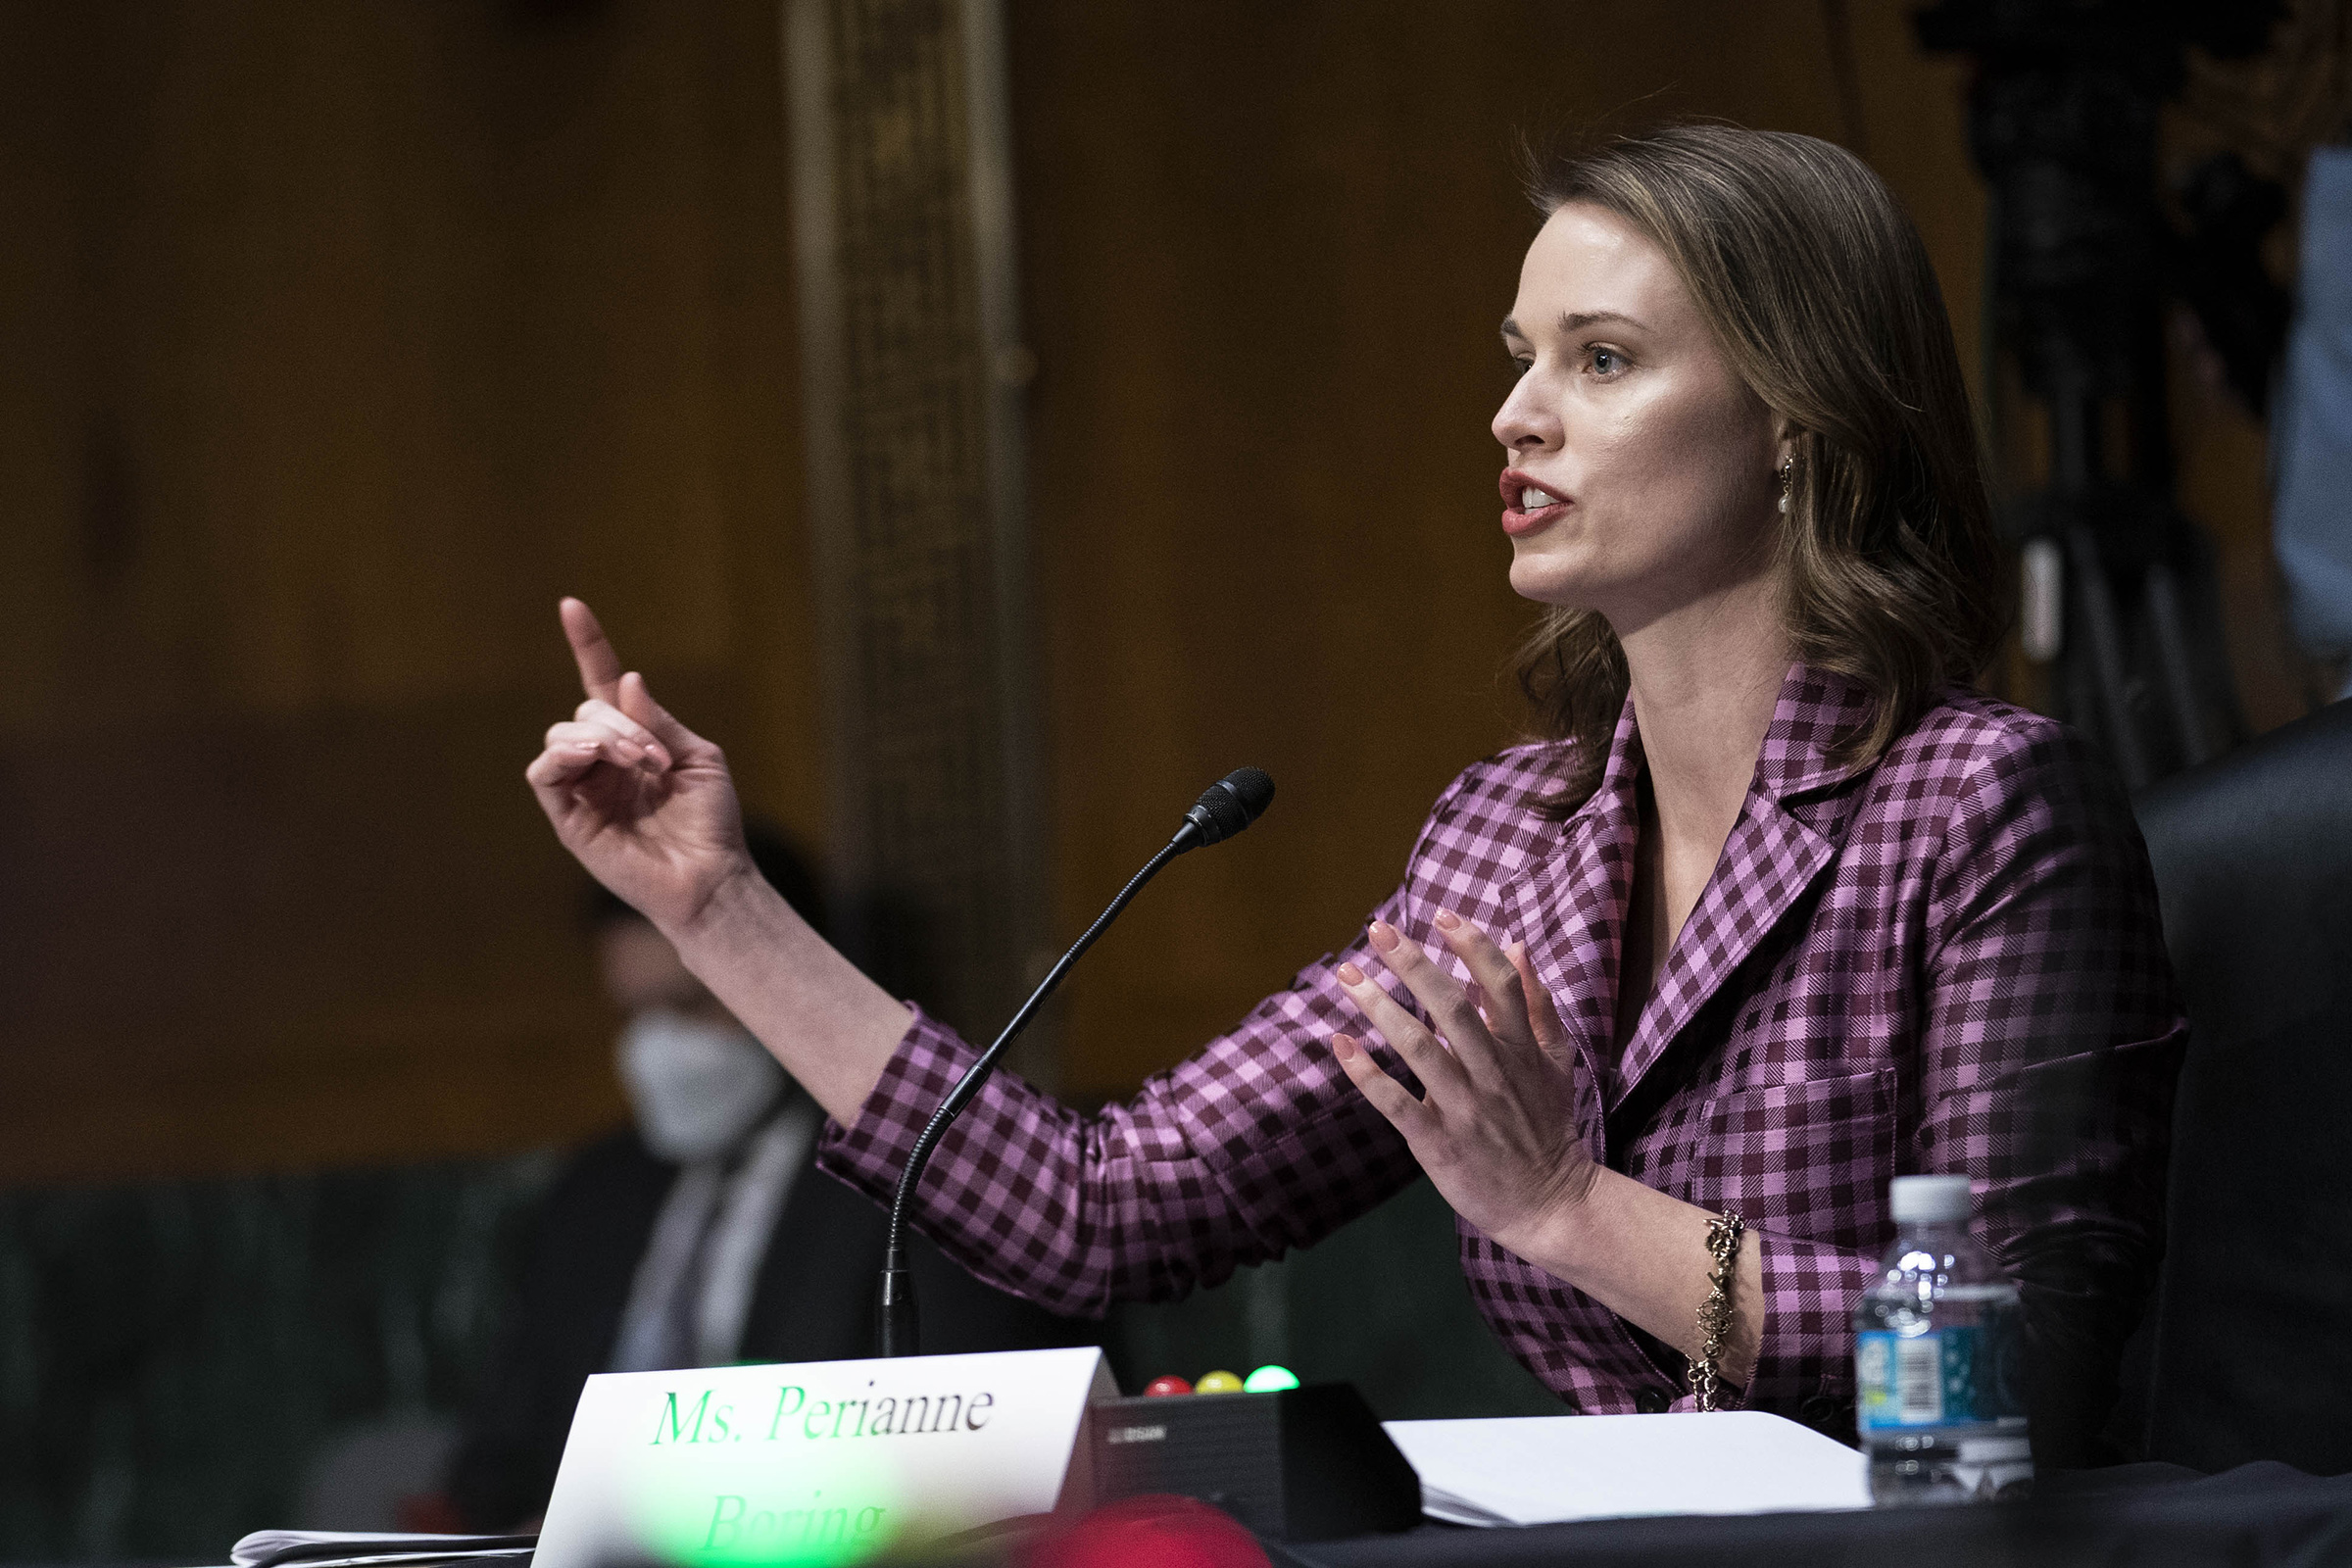 Perianne Boring, founder and CEO of the Chamber of Digital Commerce, testifies before a congressional committee (Sarah Silbiger—Bloomberg/Getty Images)